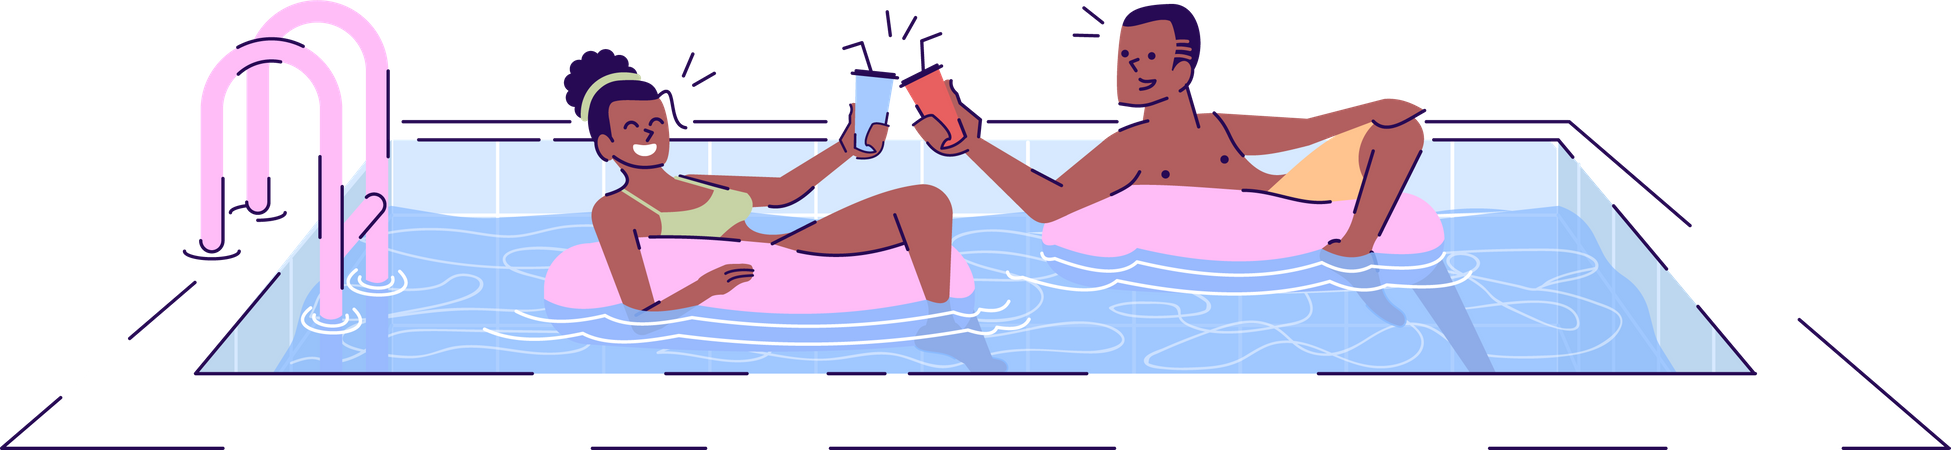 Couple in swimming pool Illustration